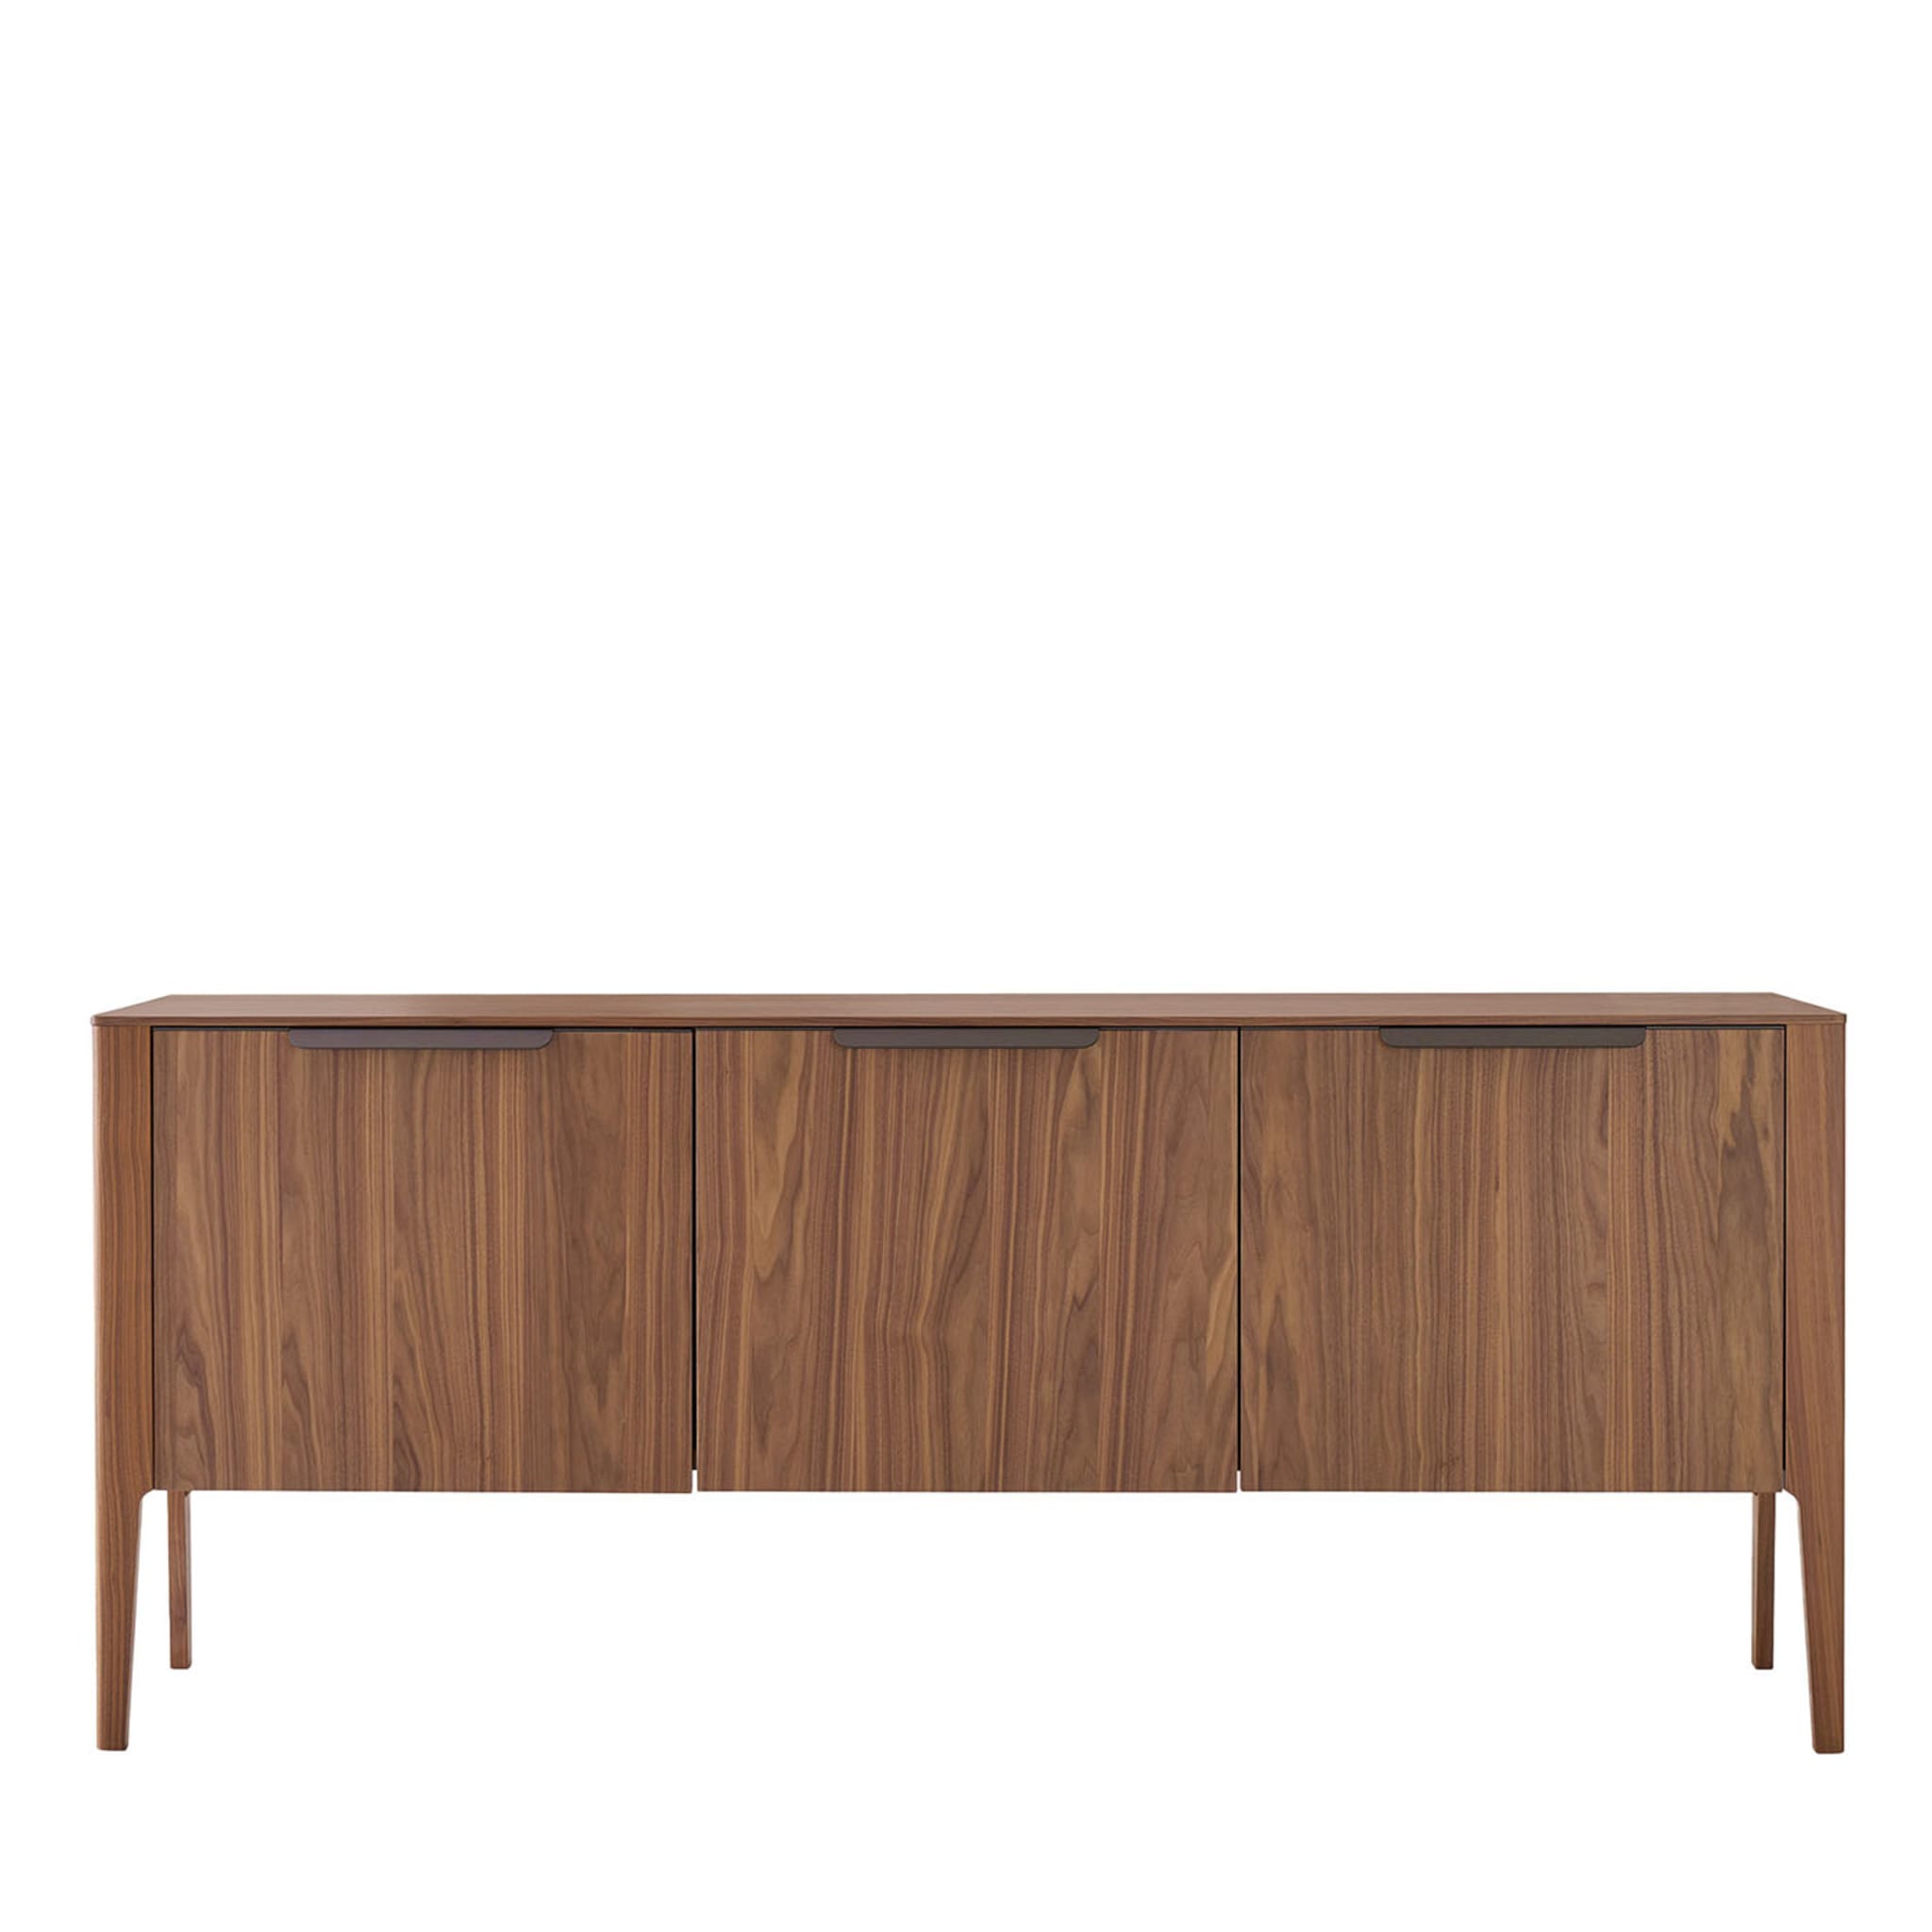 Cannaregio Sideboard in Canaletto Walnut Wood - Main view